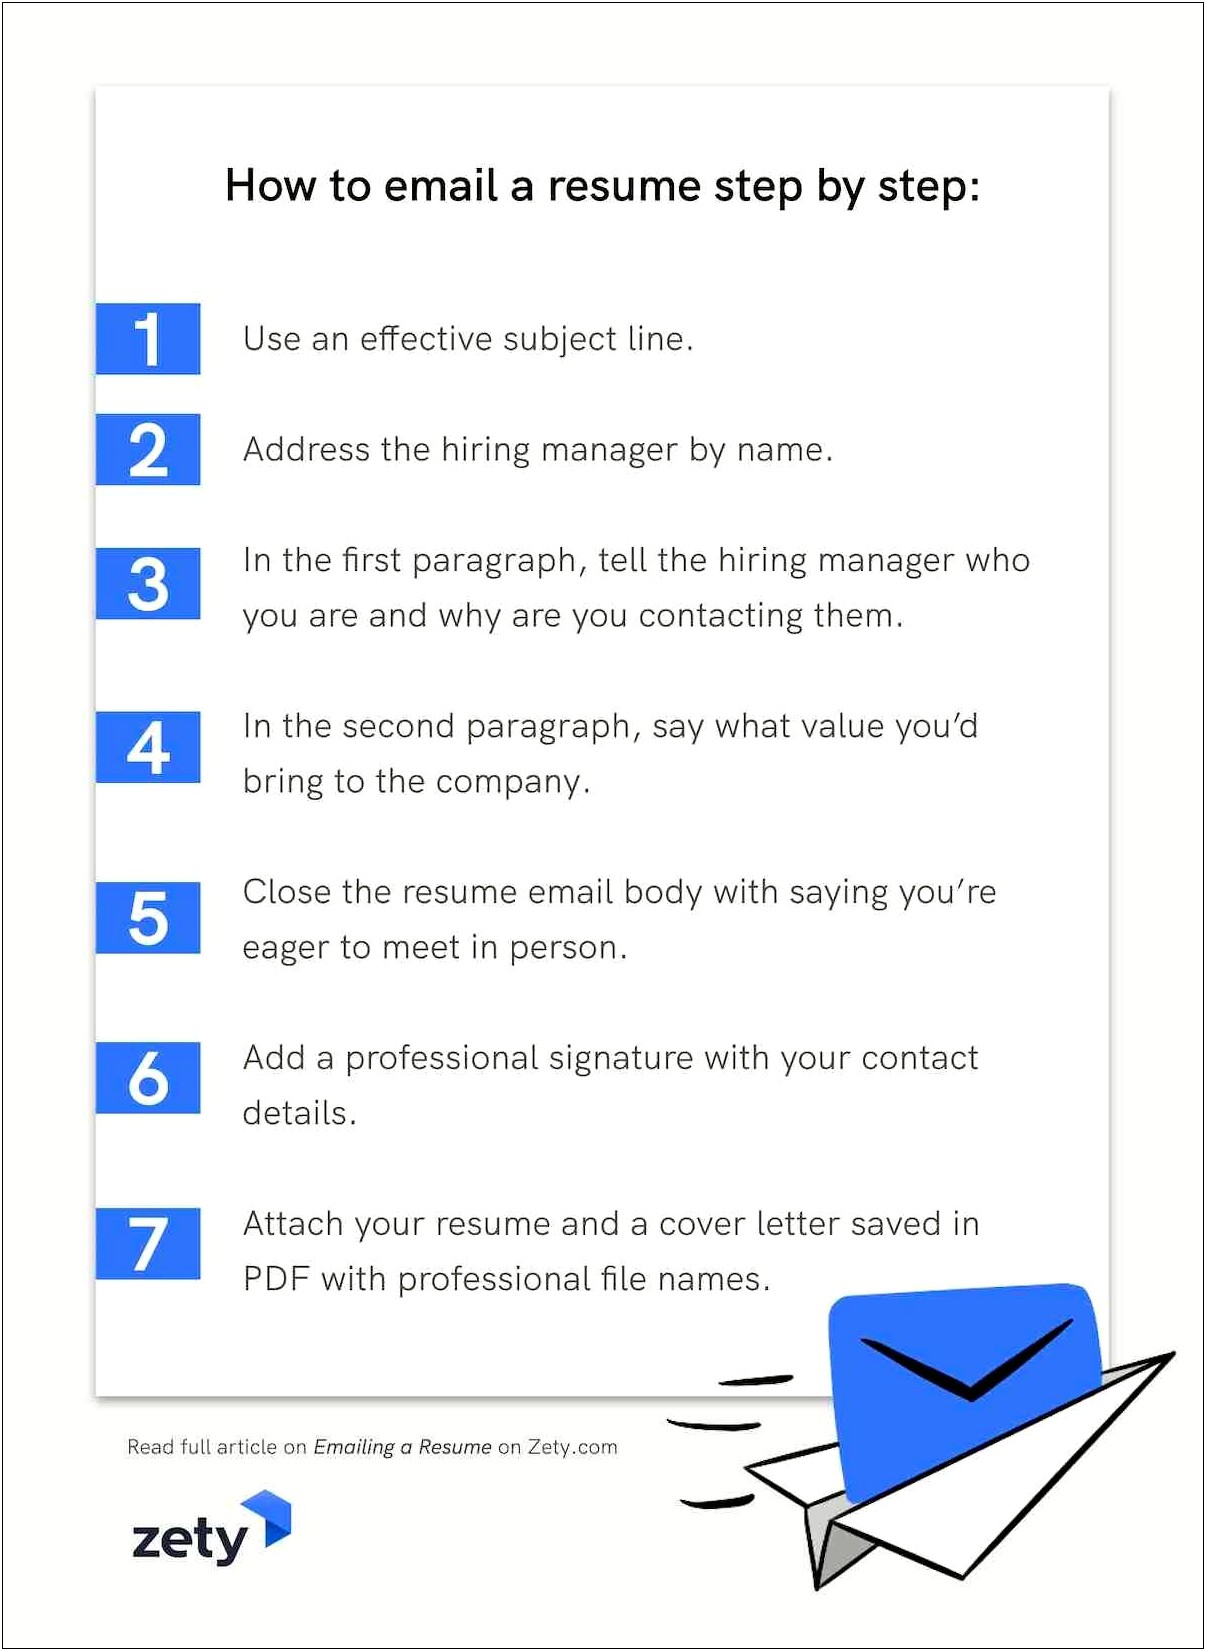 Best Email Service For Resume